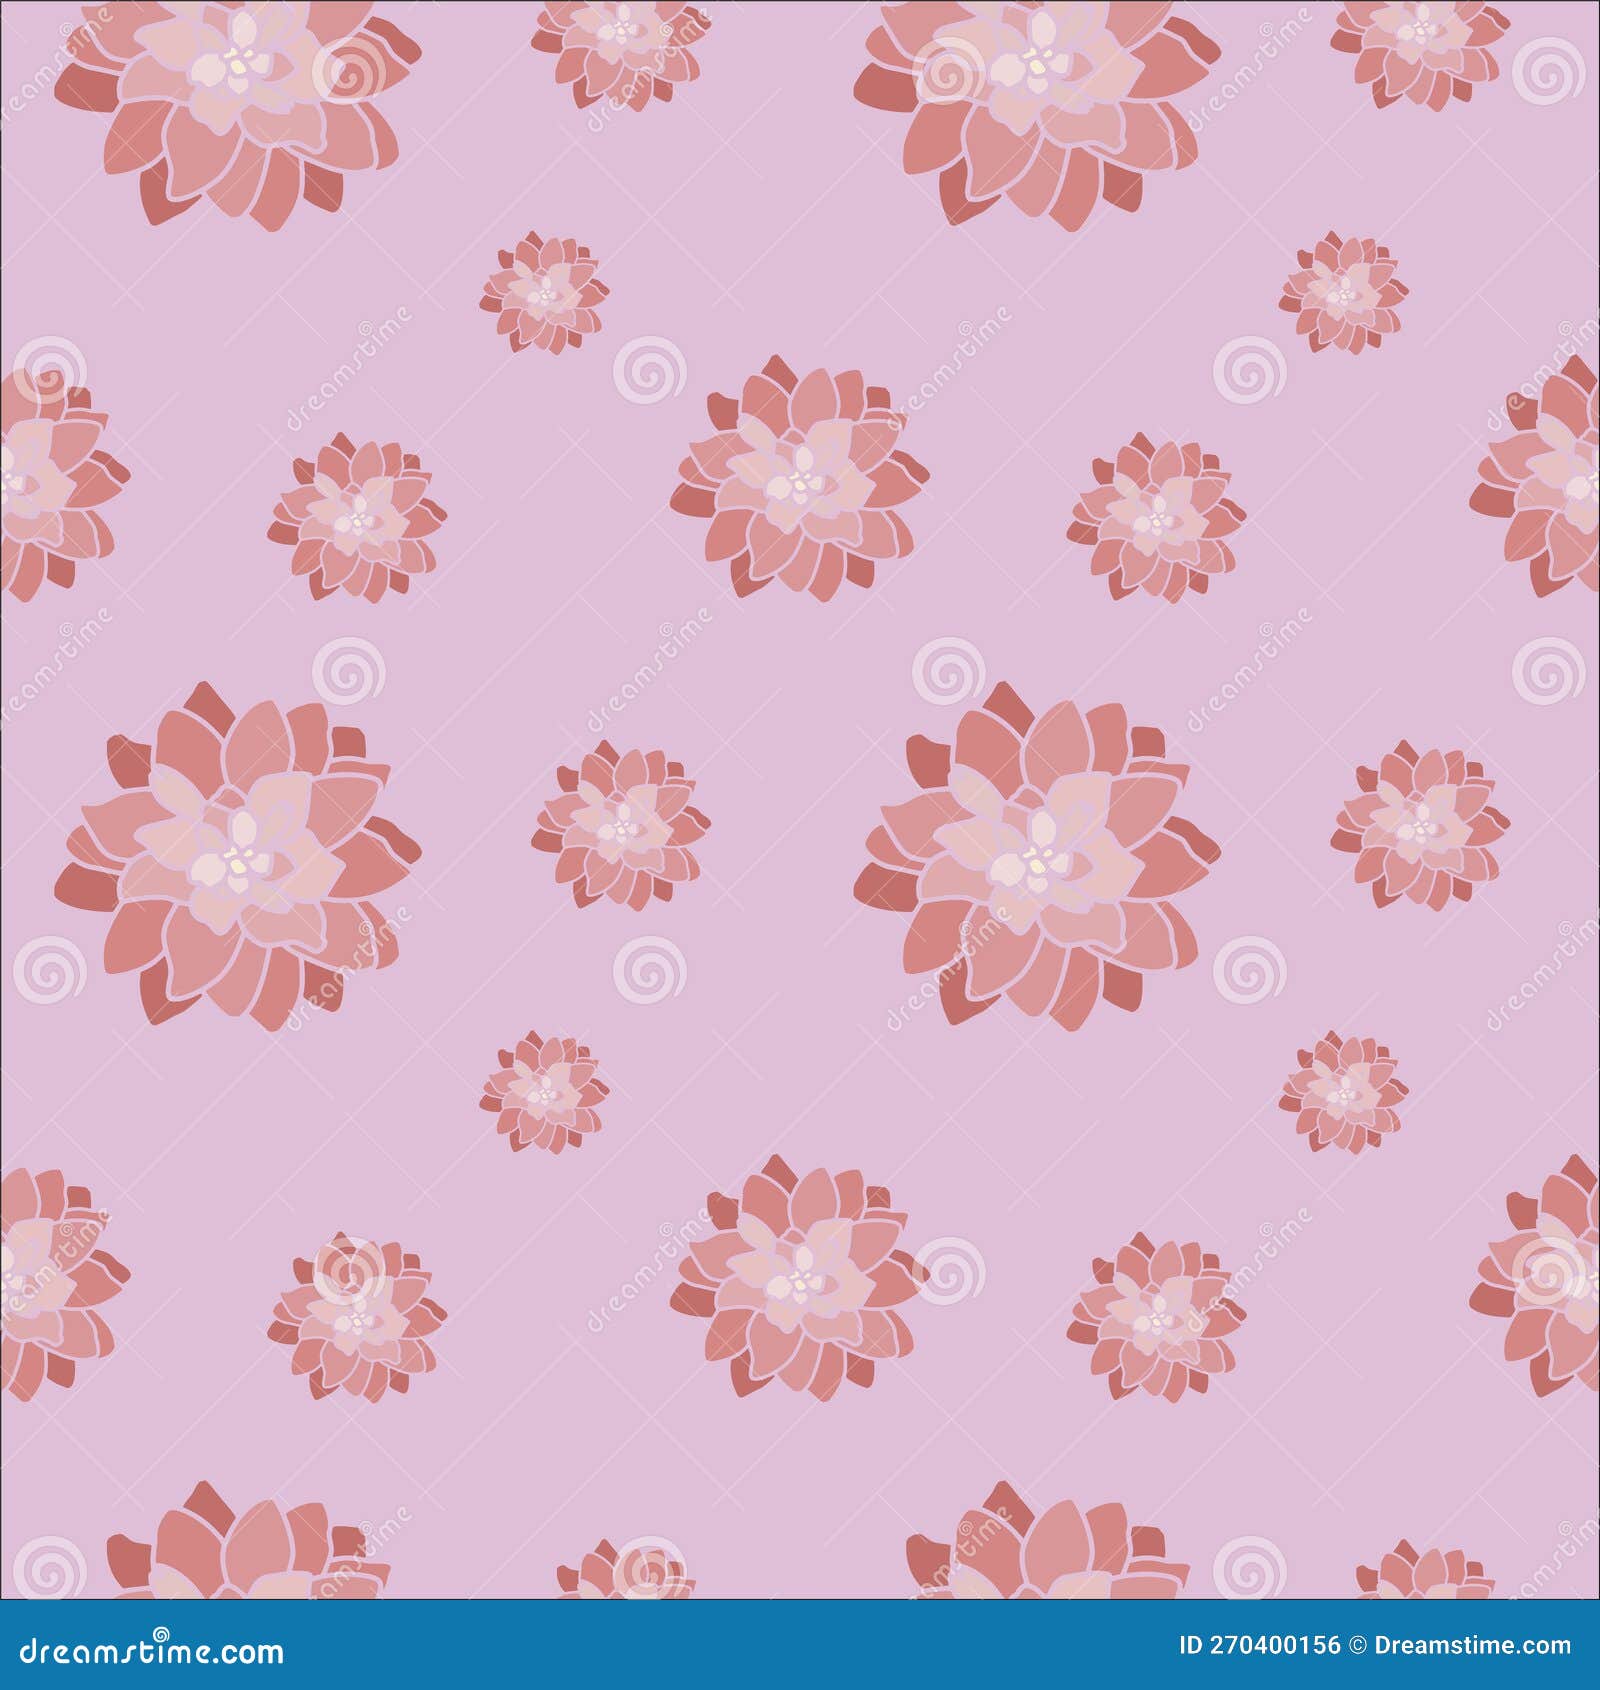 repeating pattern pink flowers with pink background